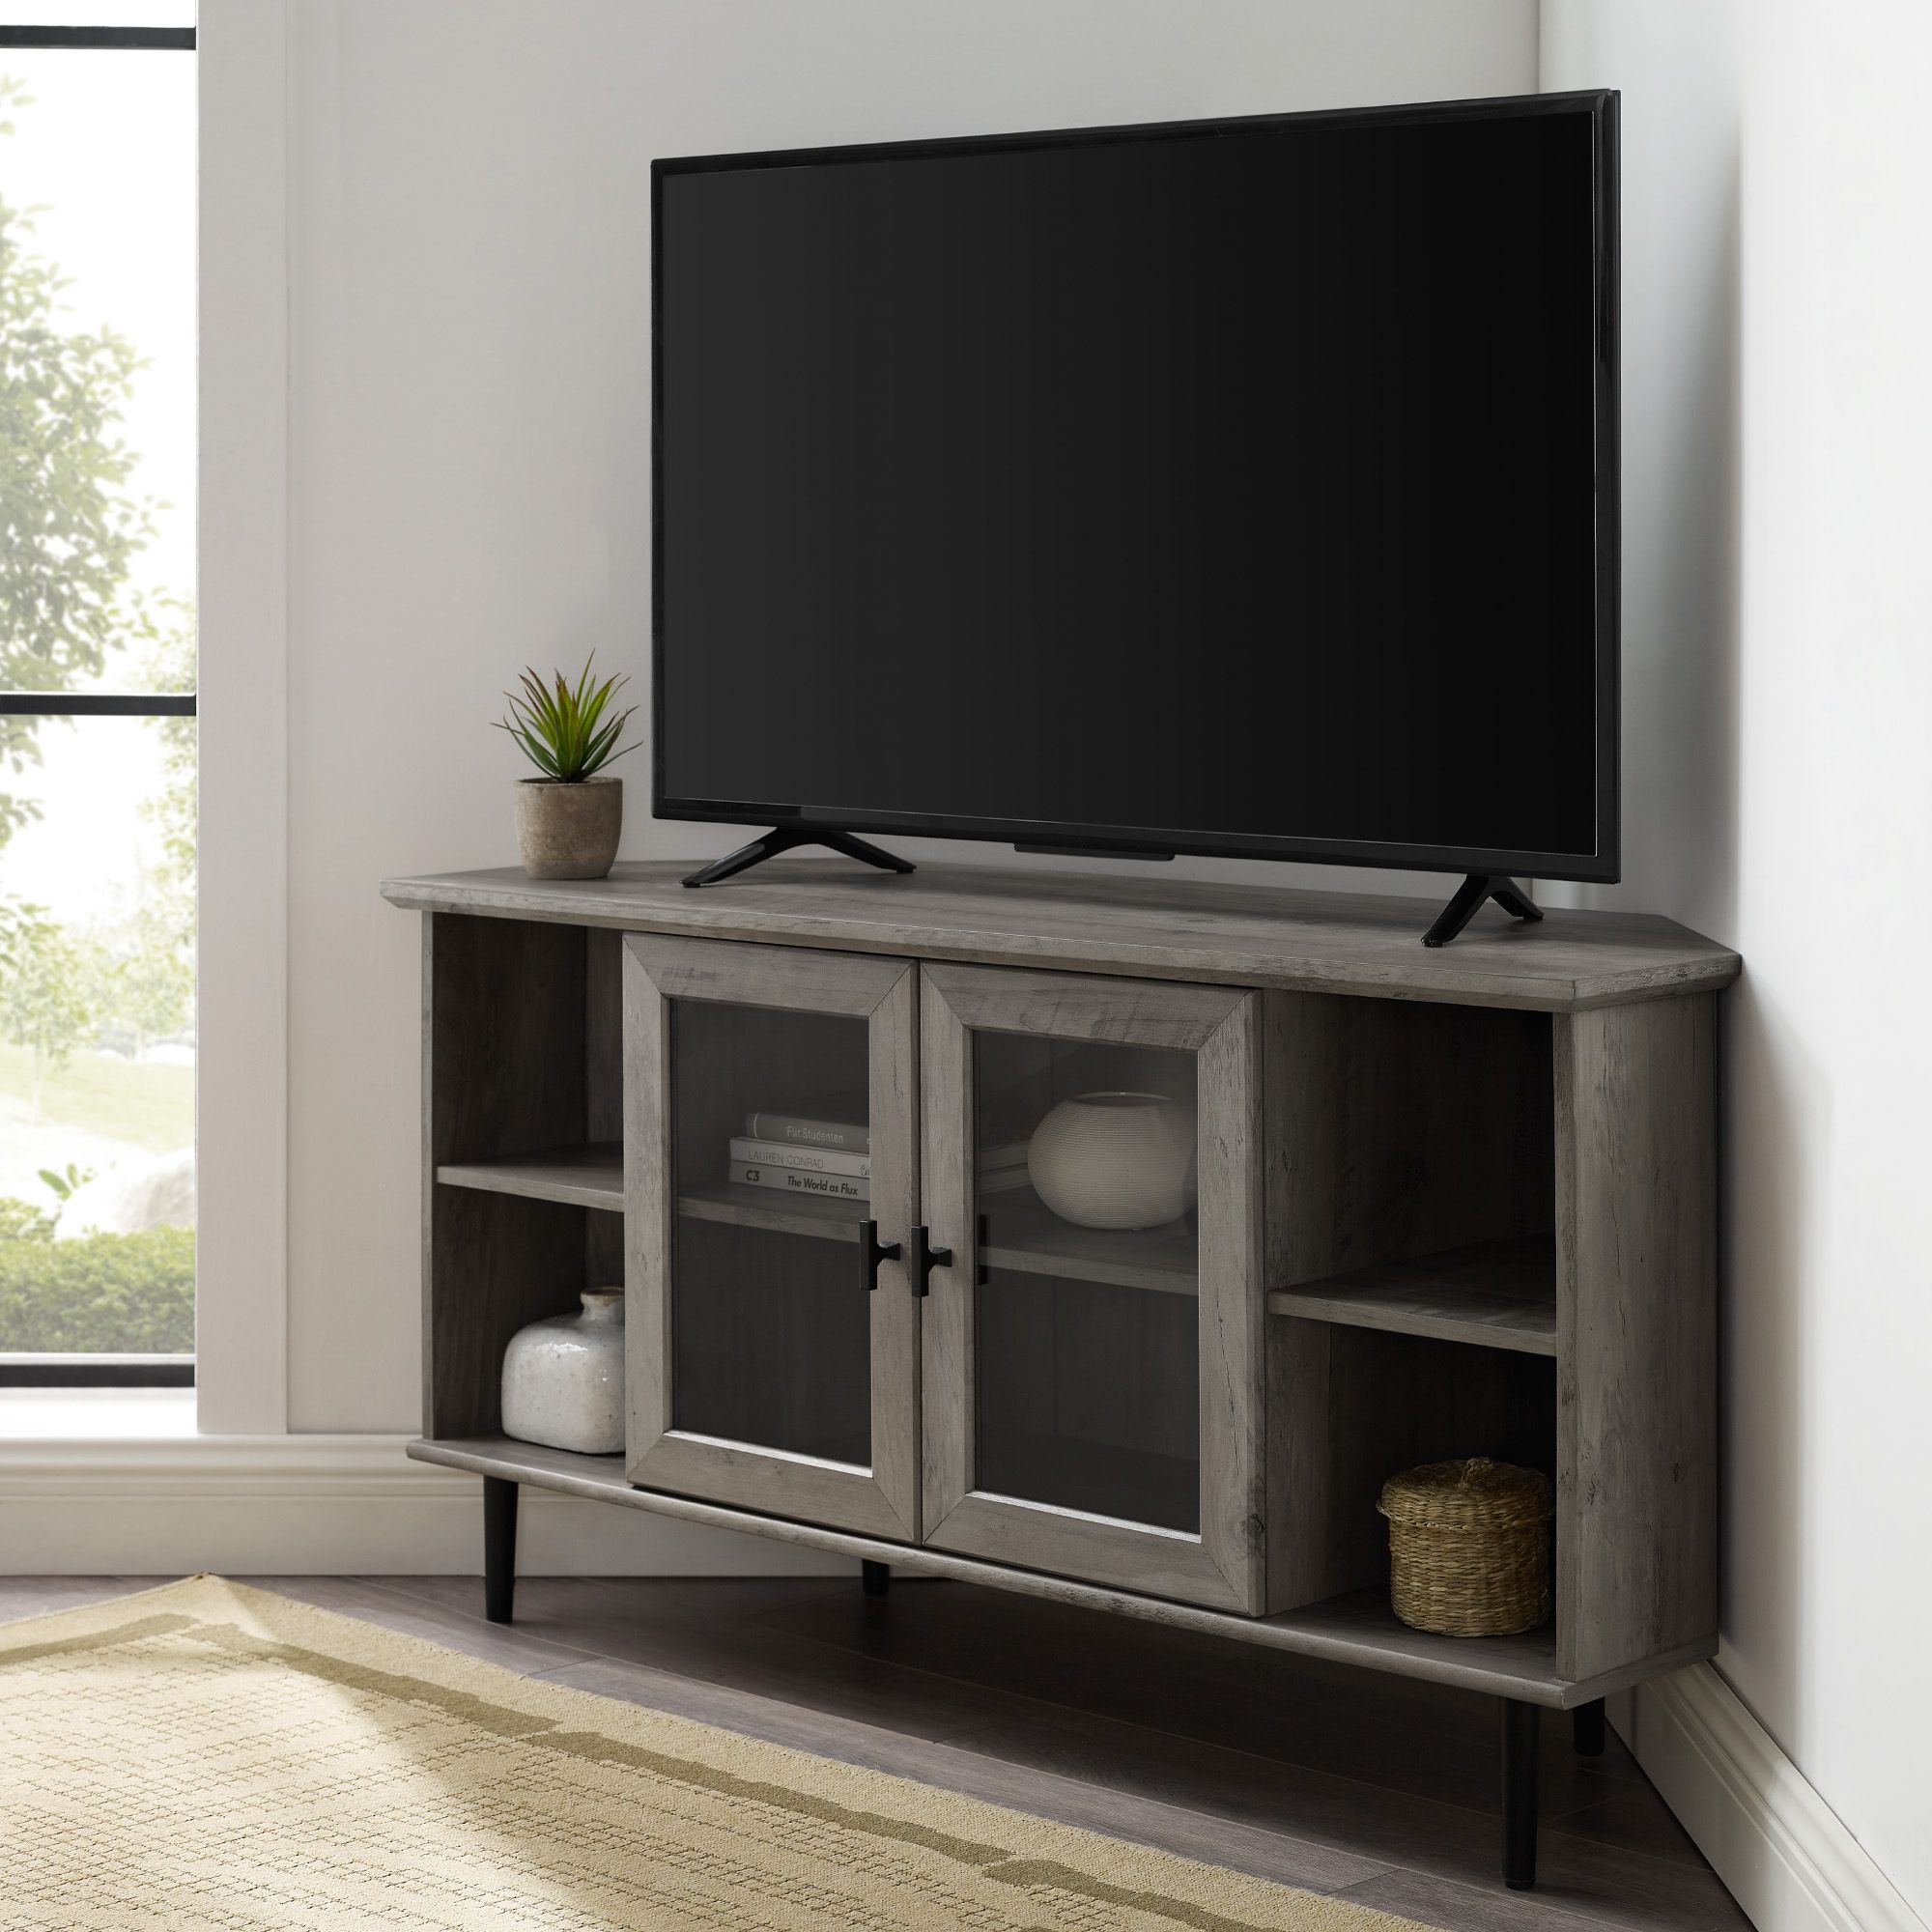 Manor Park Glass Door Corner Tv Stand For Tvs Up To 55 With 60" Corner Tv Stands Washed Oak (Photo 1 of 15)